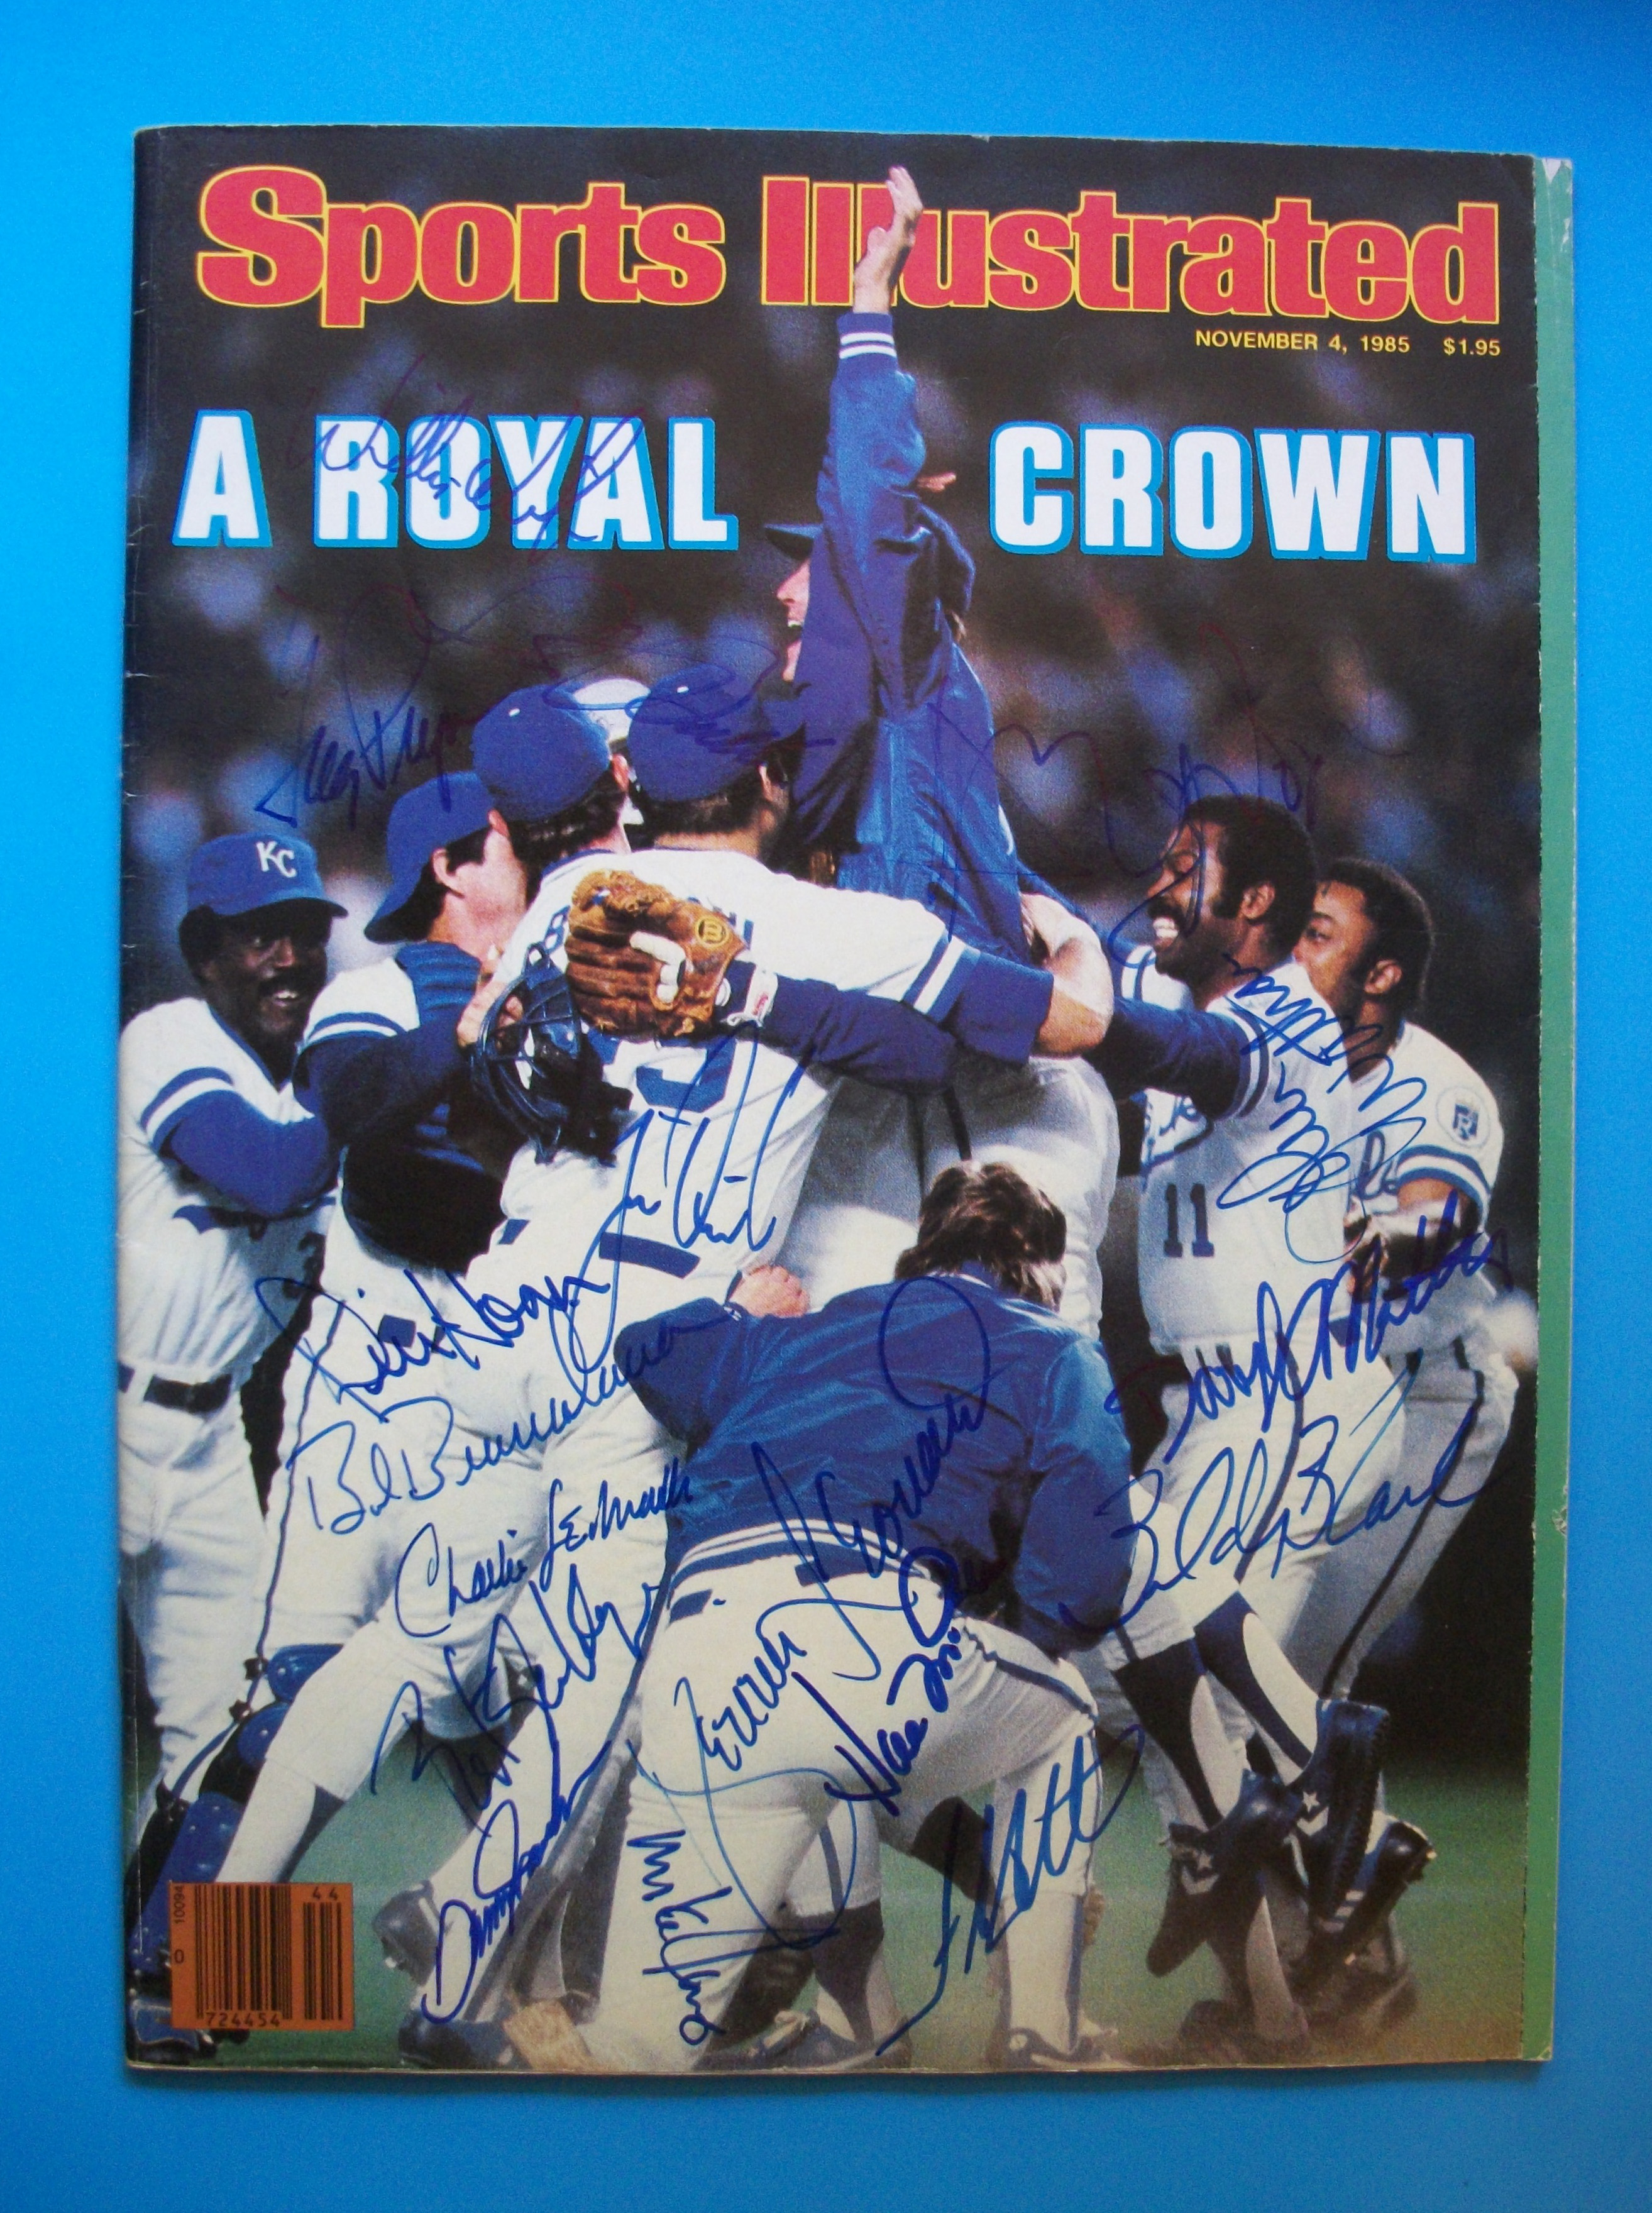 WILLIE WILSON KANSAS CITY ROYALS 1985 WS CHAMPS ACTION SIGNED 8x10